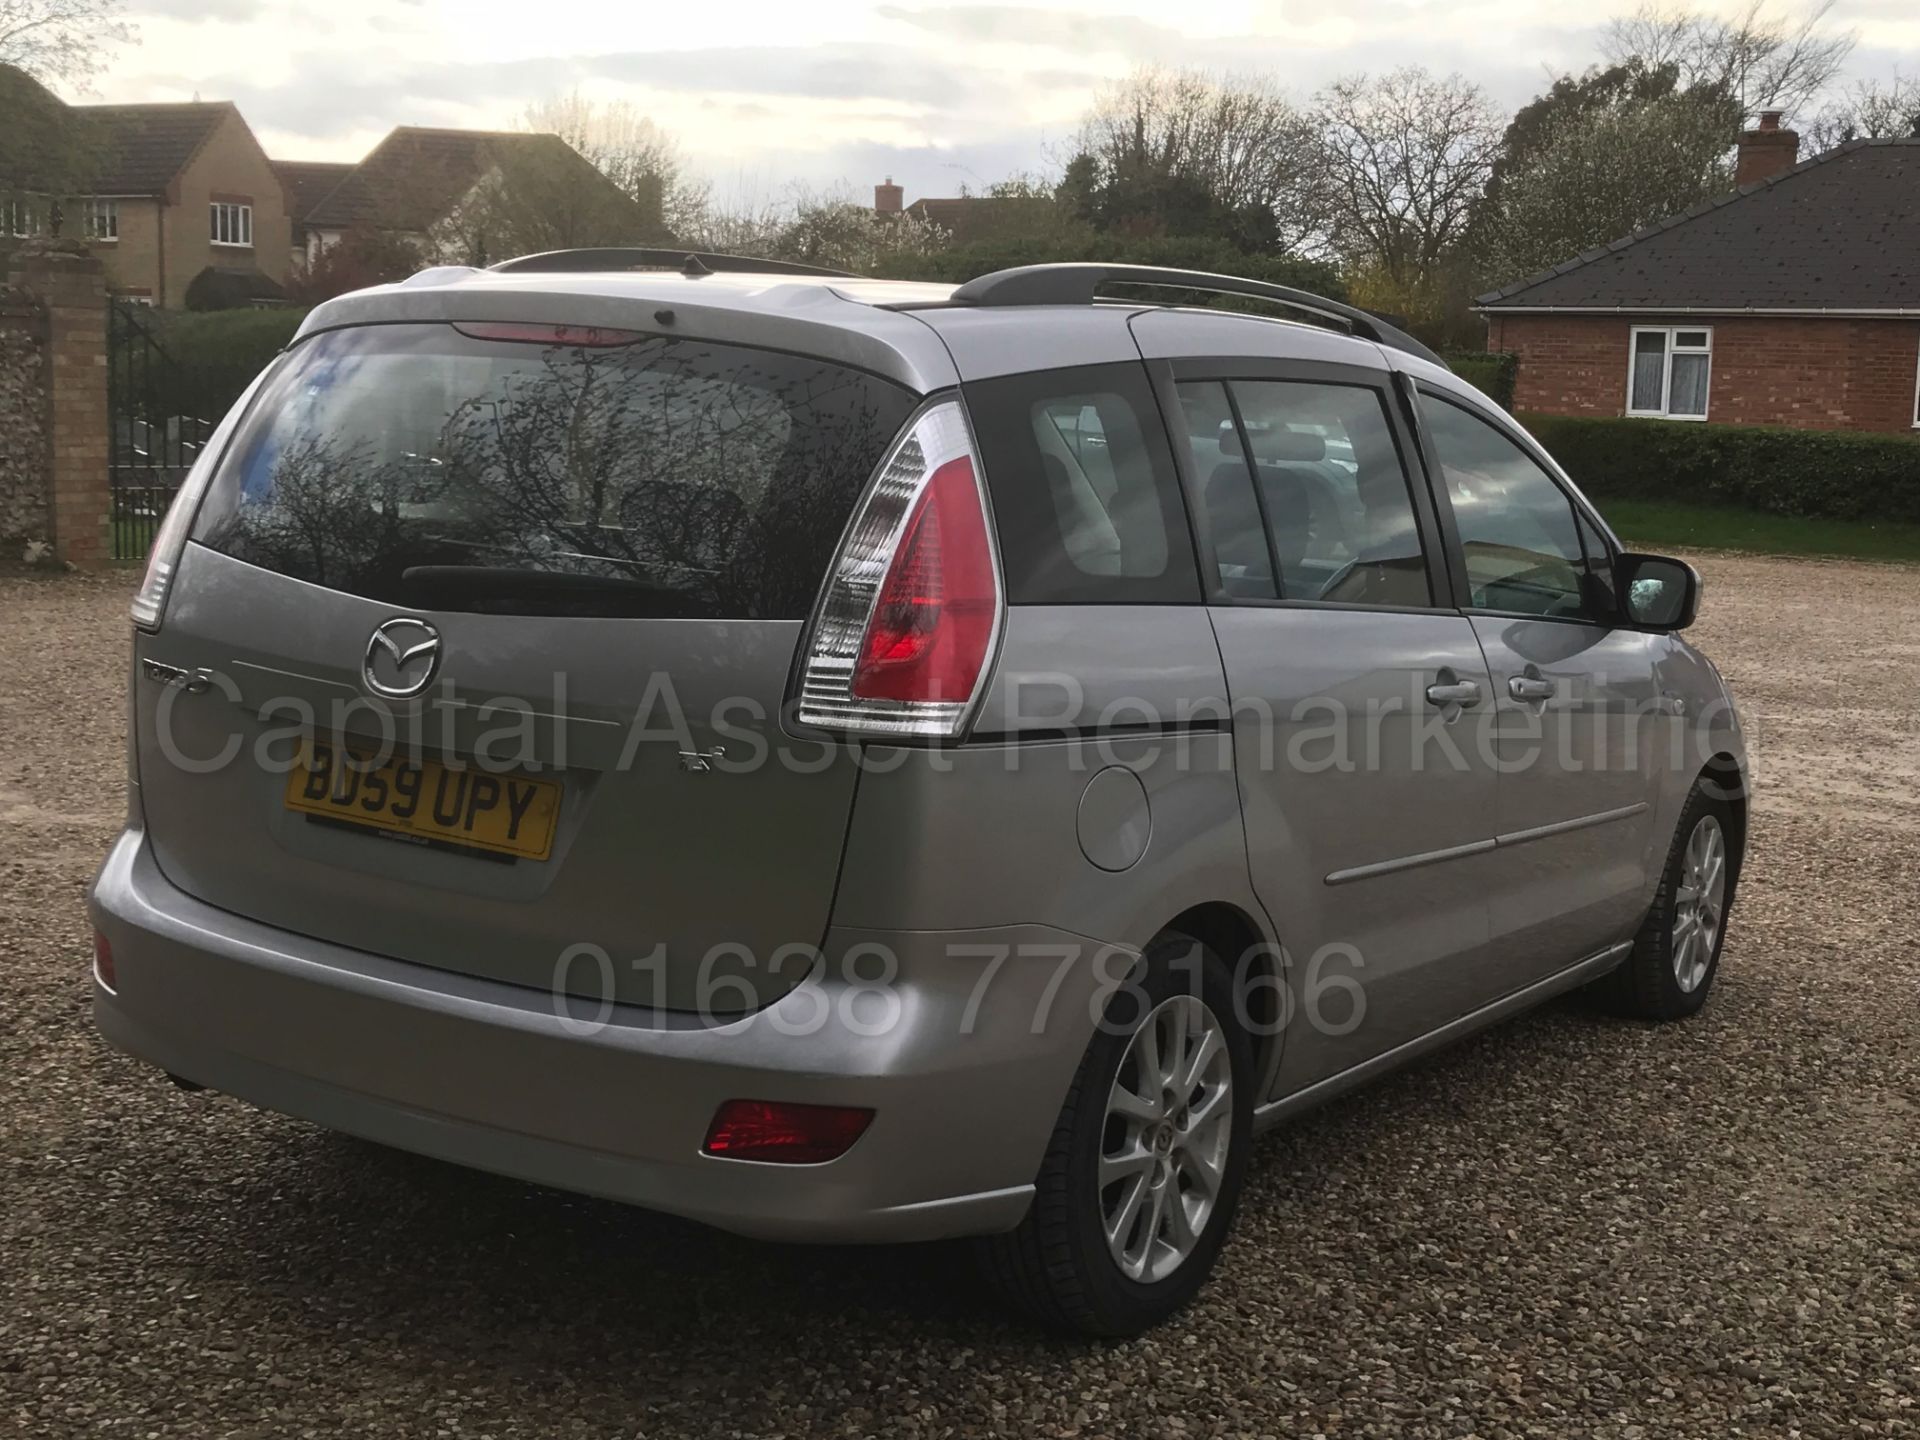 (On Sale) MAZDA 5 'TS2' (2010 MODEL) '2.0 DIESEL - 110 BHP - 6 SPEED' *7 SEATER - AIR CON* (NO VAT) - Image 9 of 35